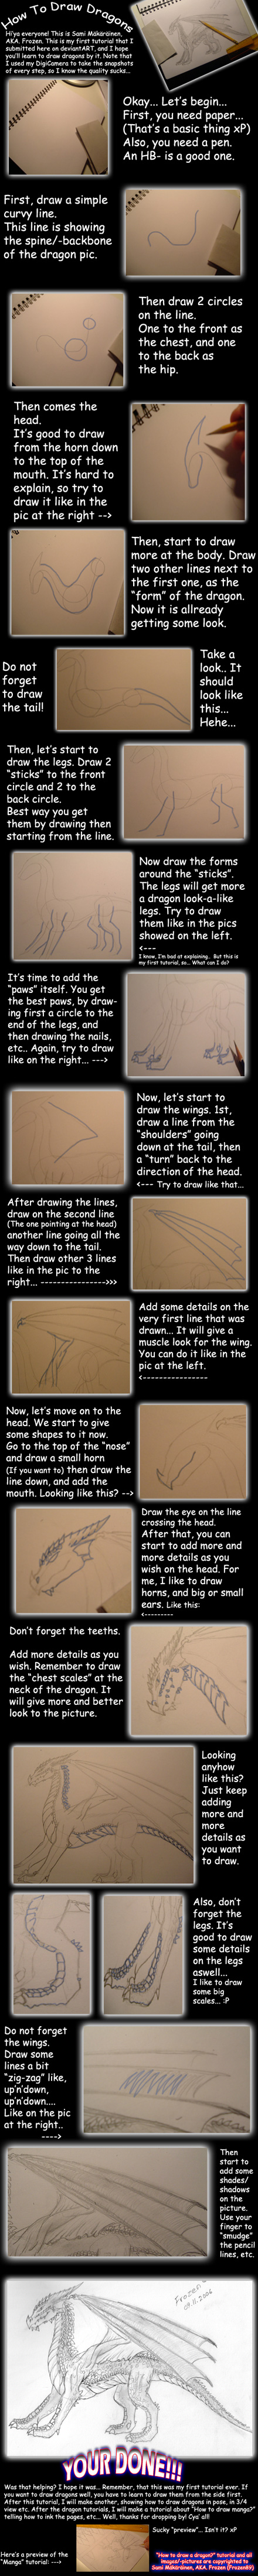 How to draw a dragon